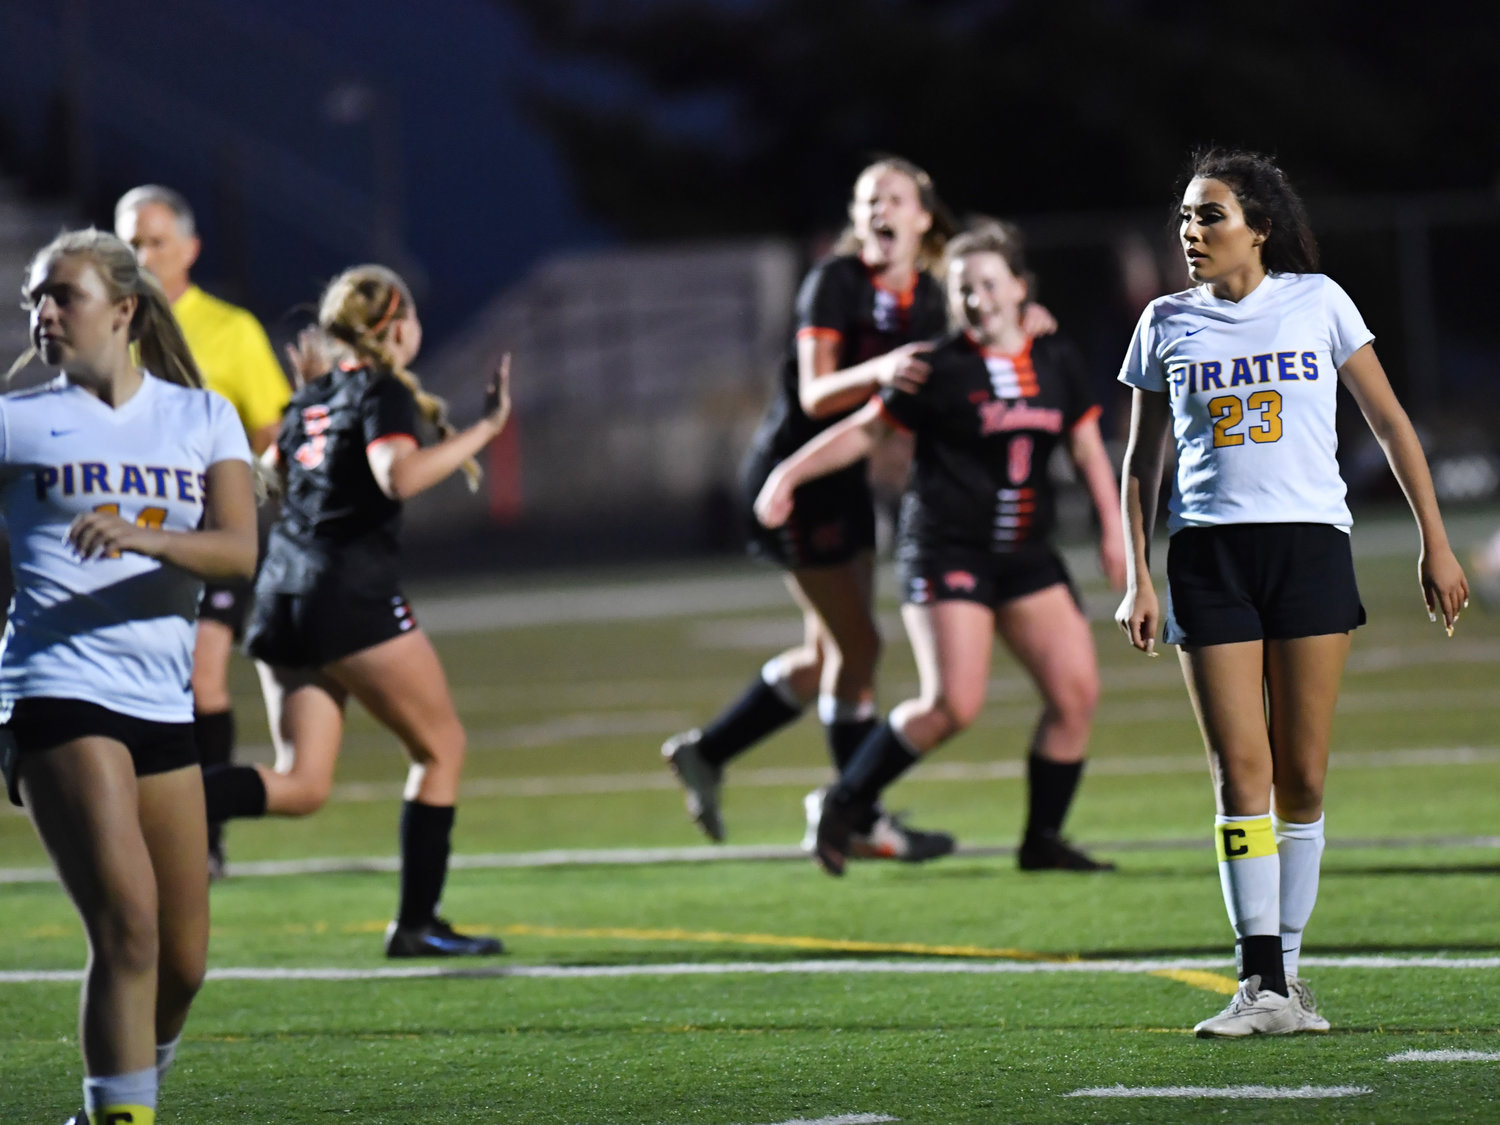 Adna's Presley Smith (23) scored the Pirates' lone goal against Kalama on Wednesday.